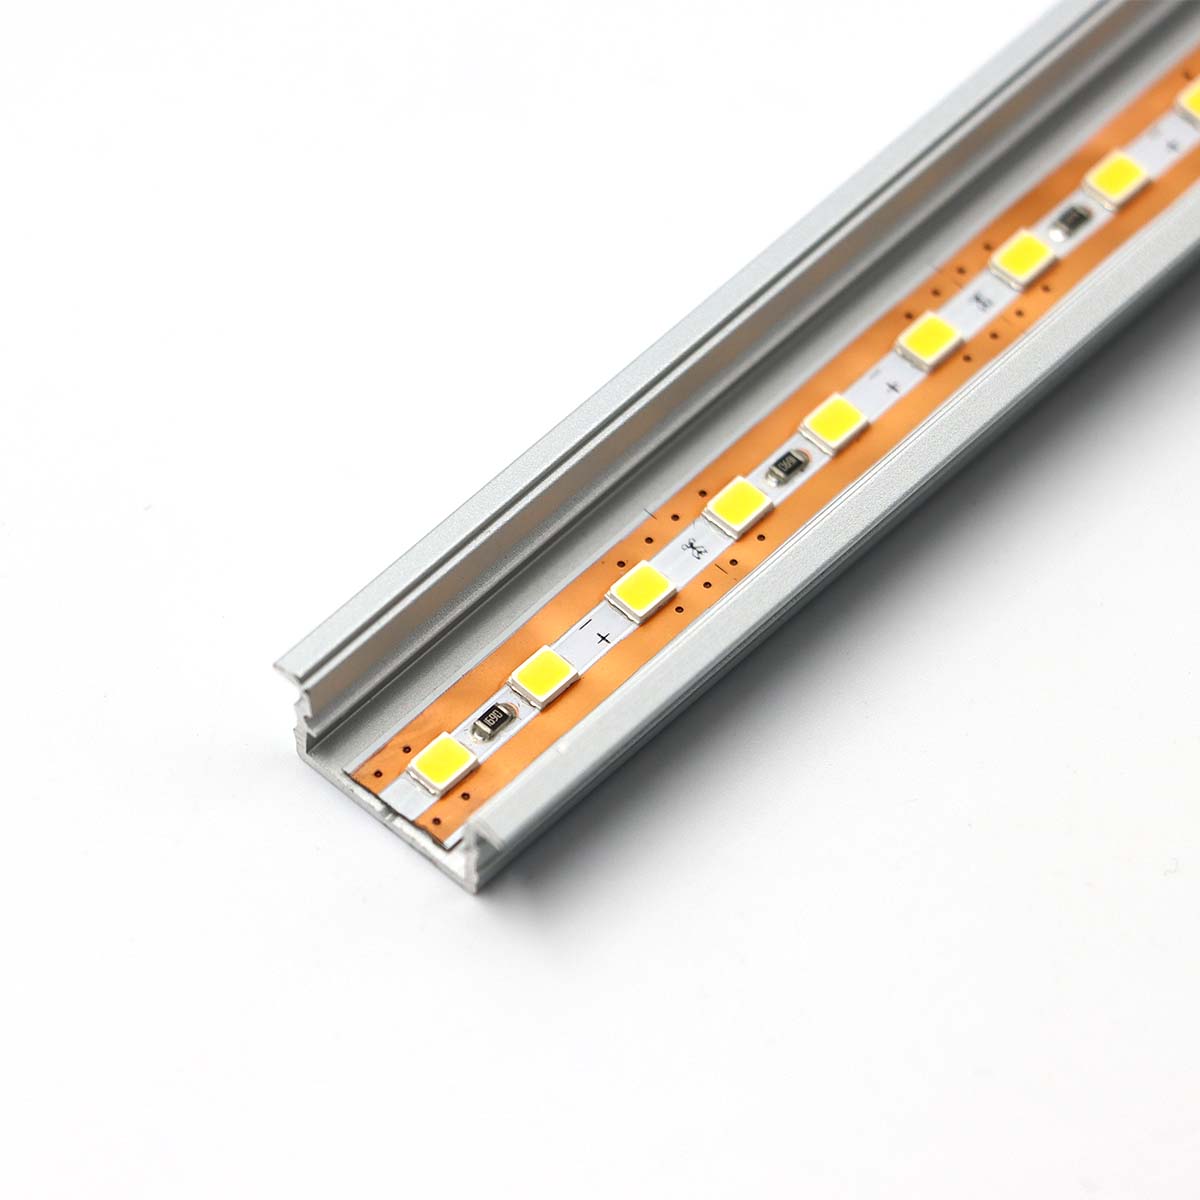 Send an inquiry for 30cm 10cm Connectable LED Aluminum Channels Strip Light Solutions to high quality Connectable LED Aluminum Channels Strip Light Solutions supplier. Wholesale Connectable LED Aluminum Channels Strip Light Solutions directly from China   Connectable LED Aluminum Channels Strip Light Solutions manufacturers/exporters. Get a factory sale price list and become a distributor/agent-vstled.com